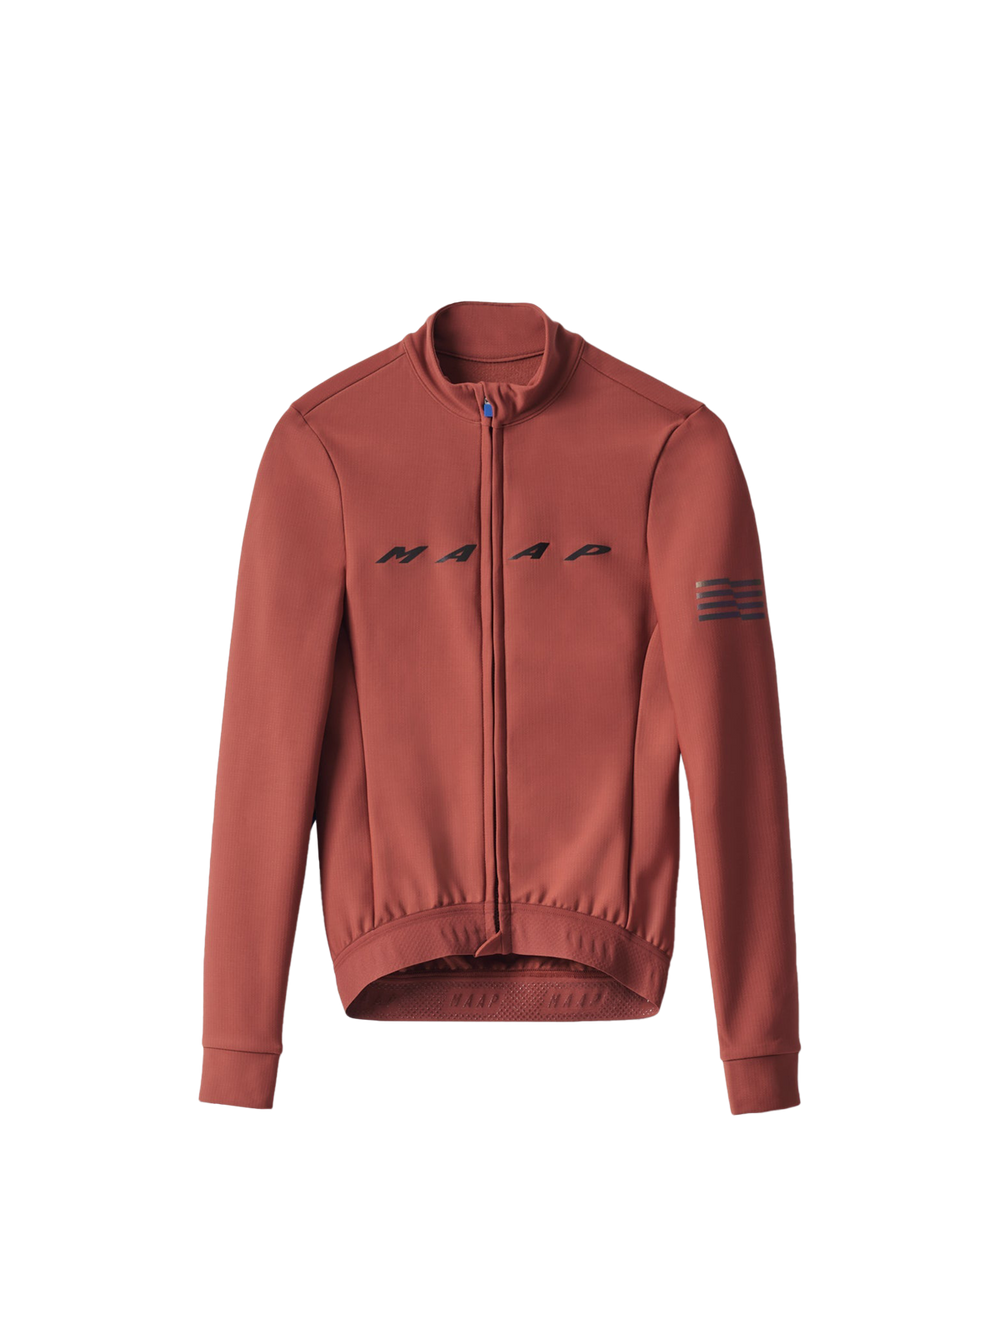 Product Image for Women's Evade Thermal LS Jersey